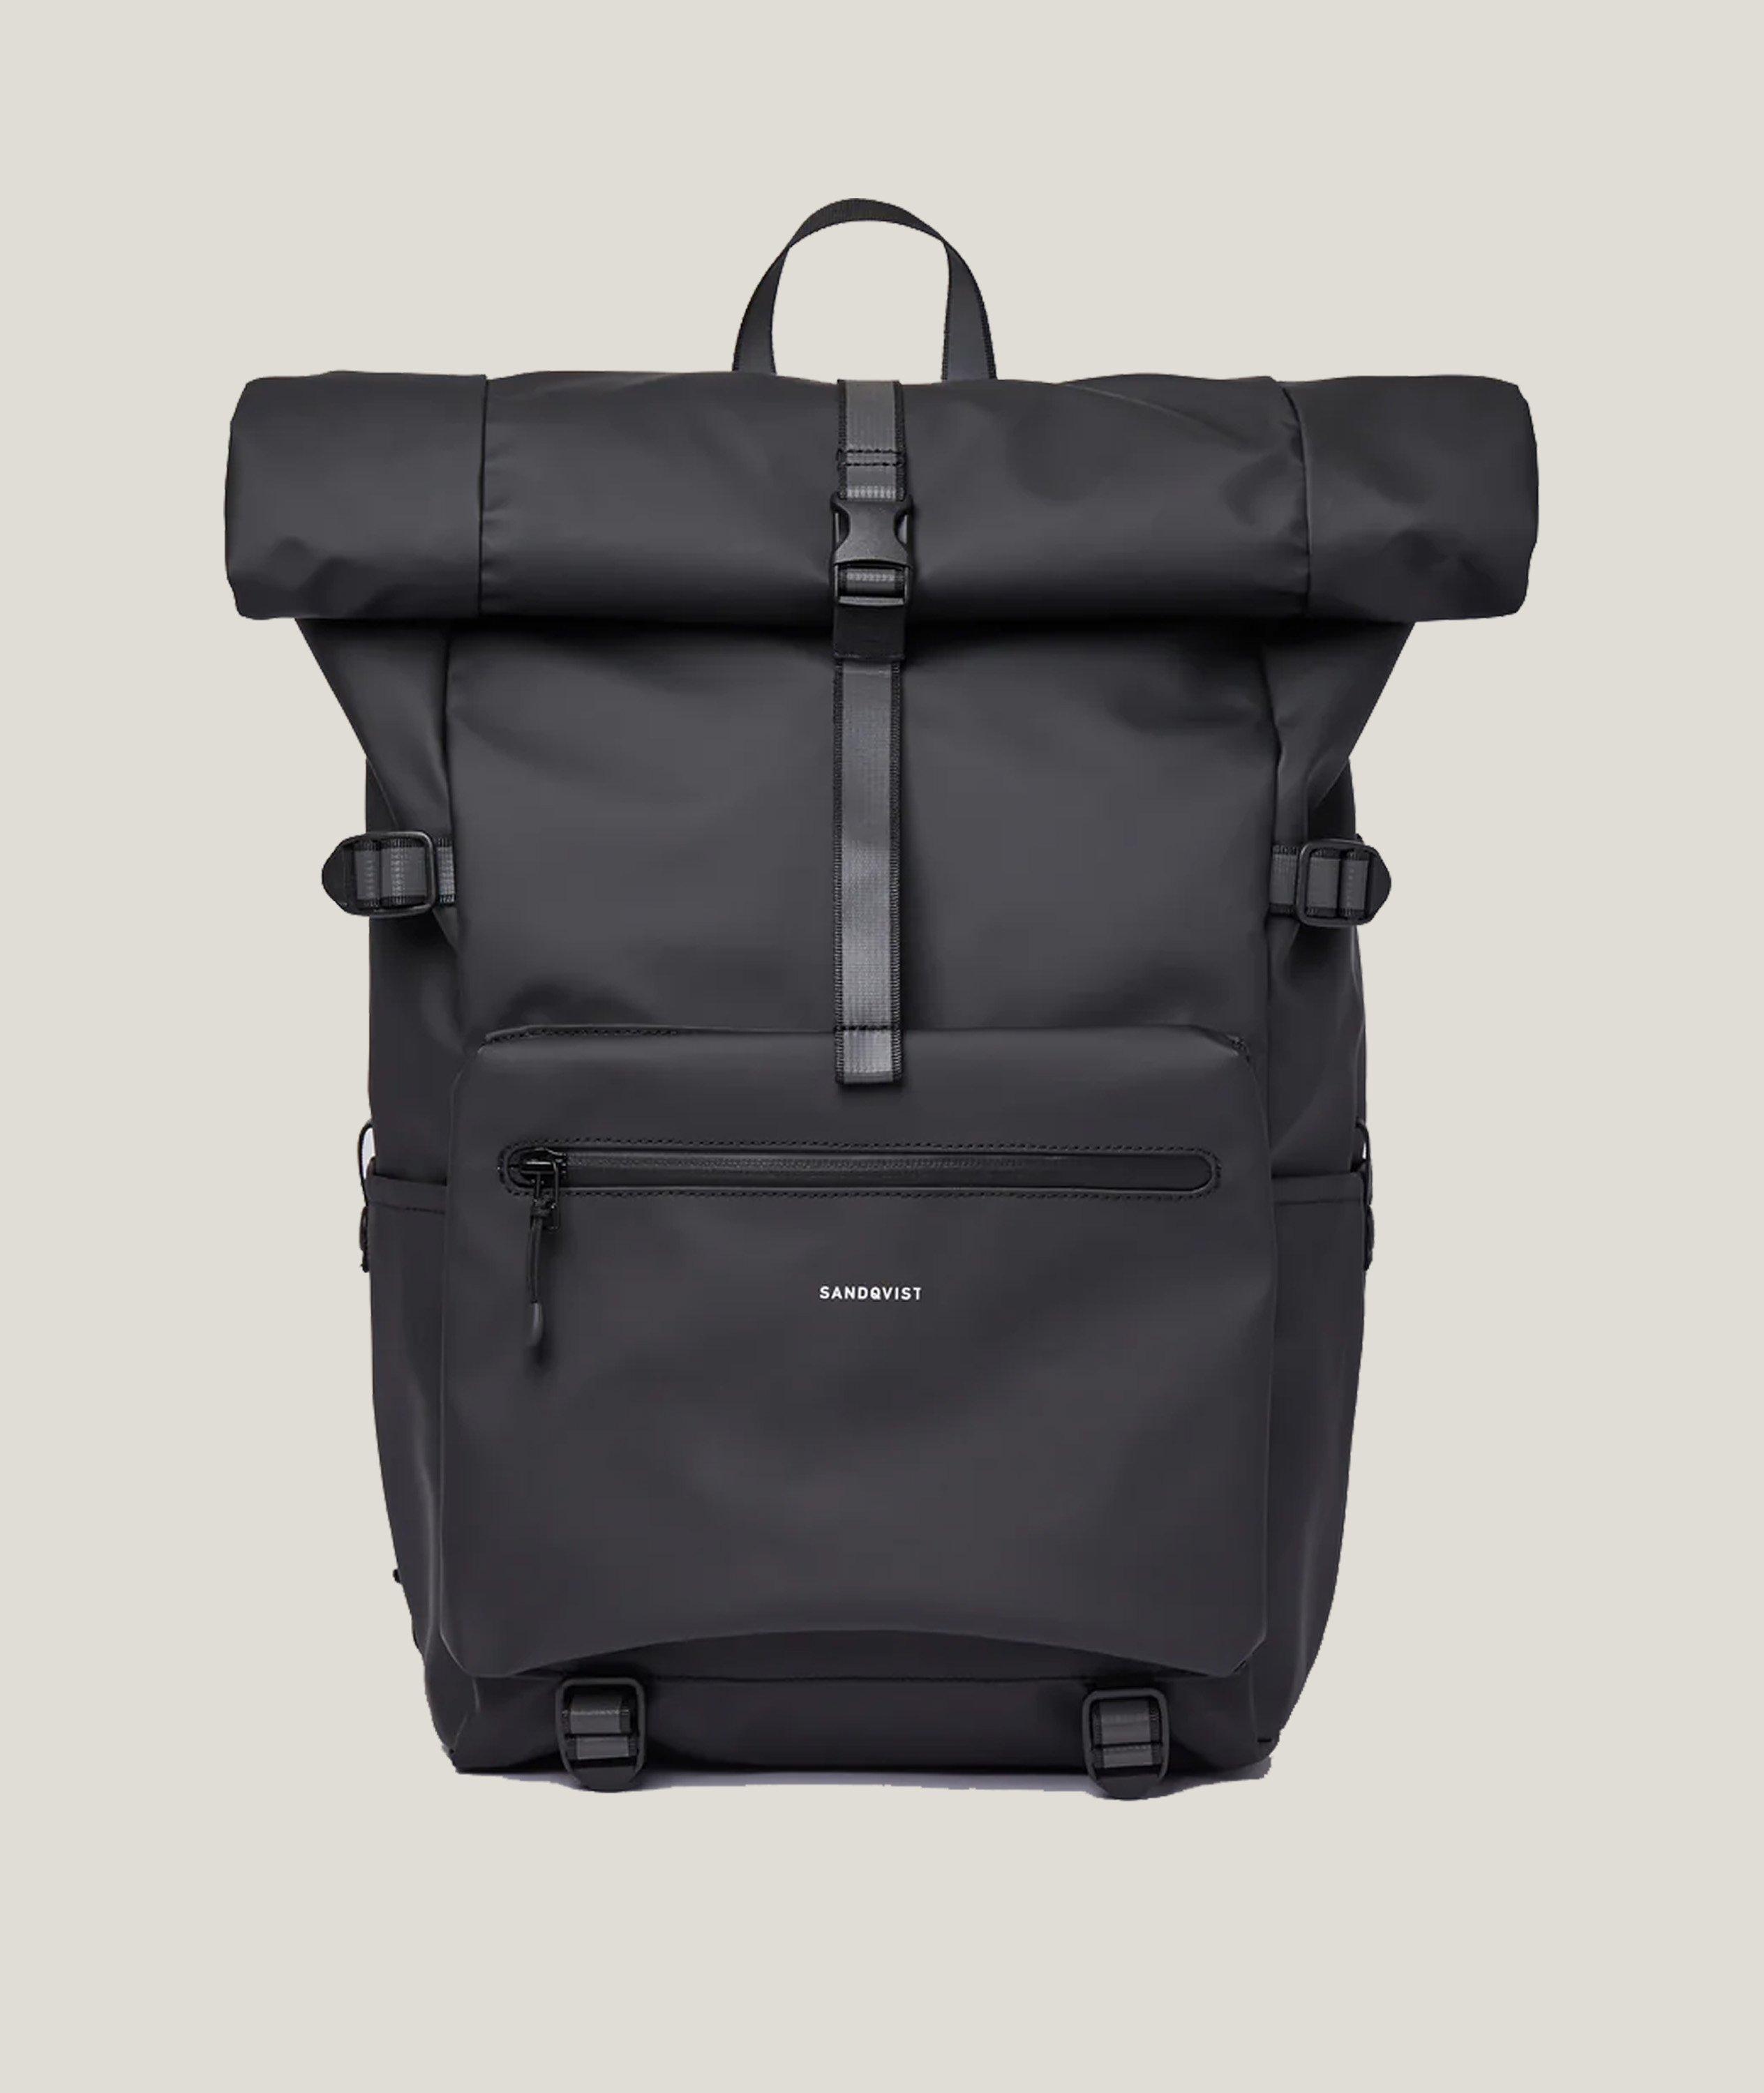 Stream Collection Ruben 2.0 Rolltop Backpack  image 0